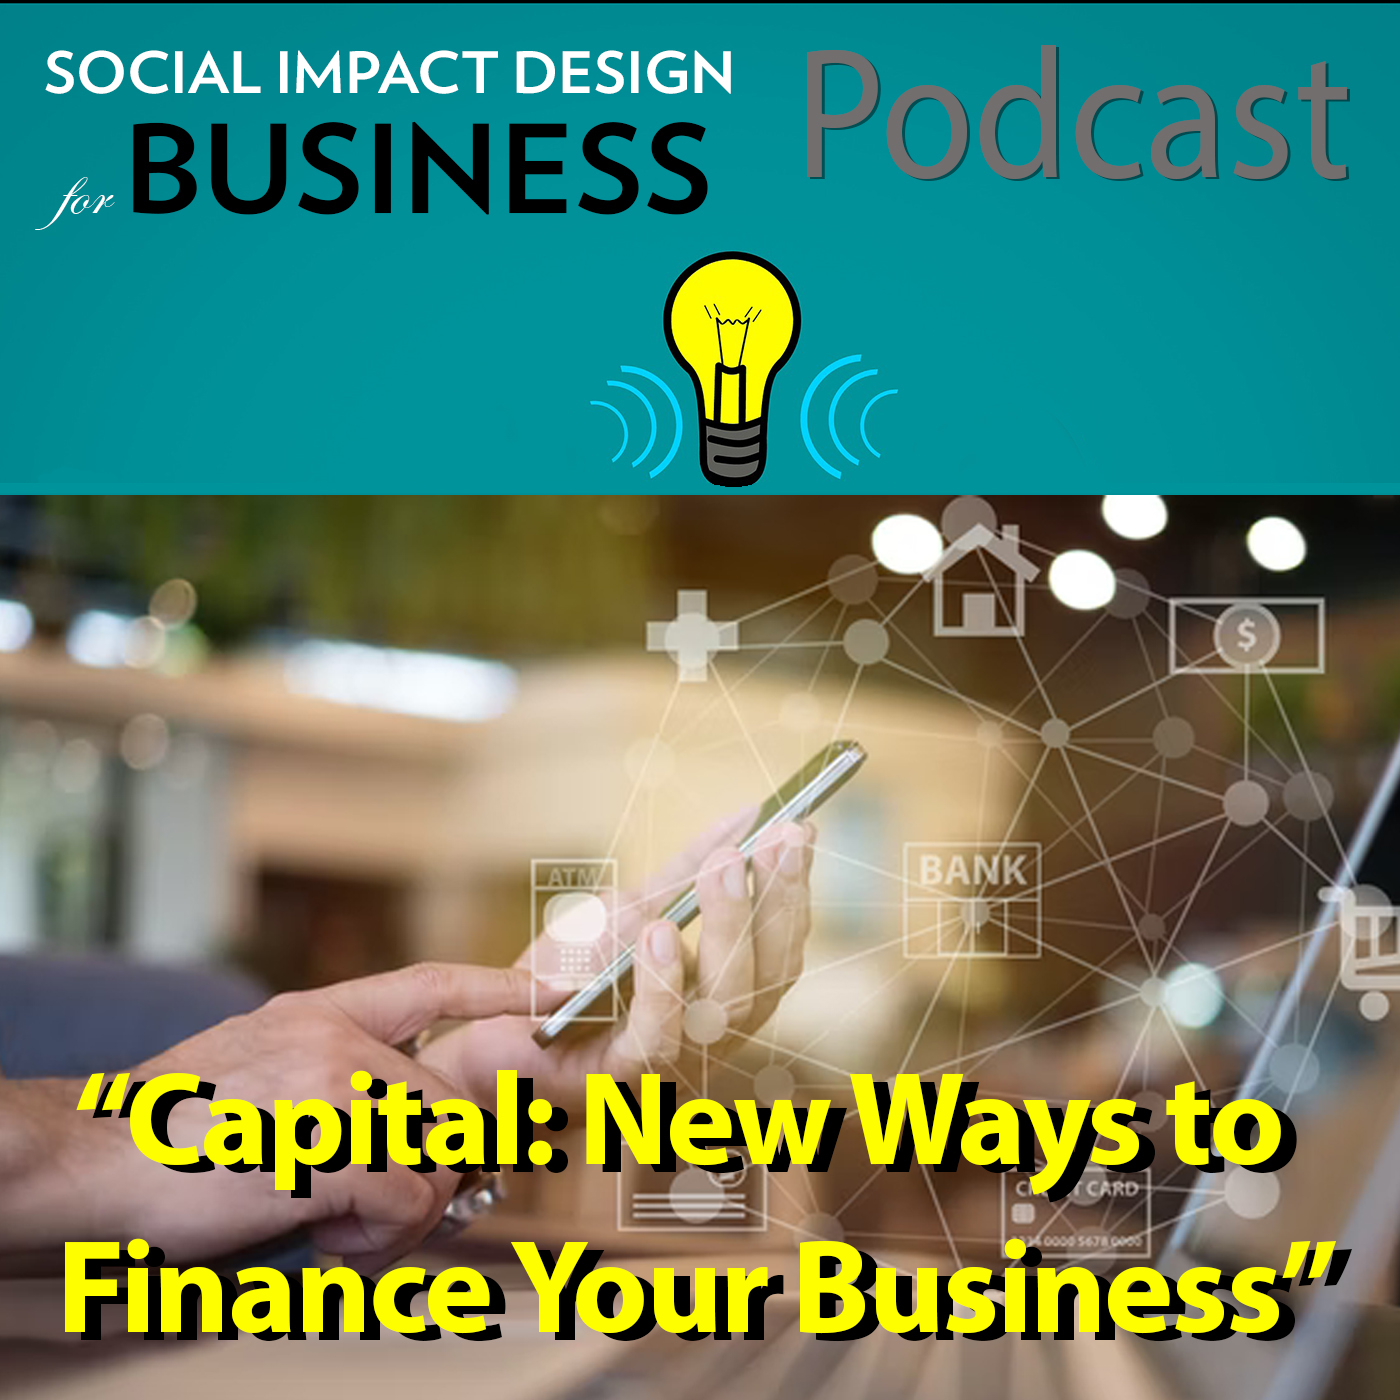 Podcast: Capital – New Ways to Finance Your Business